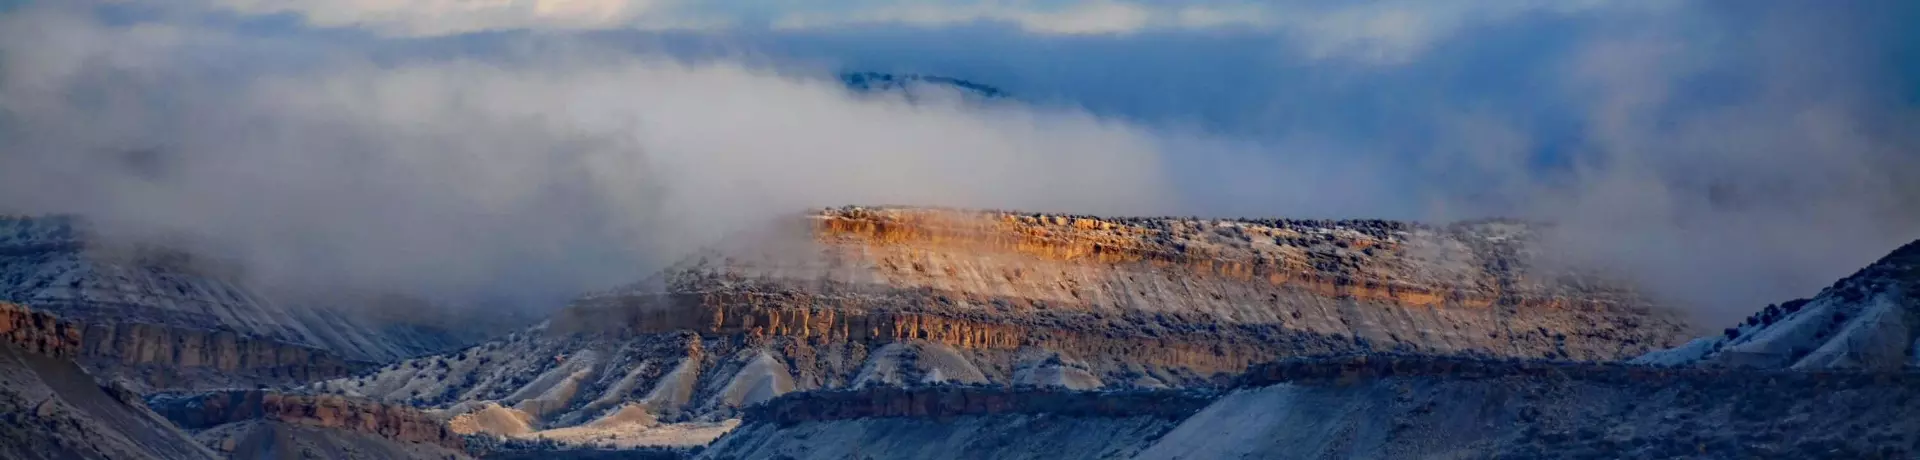 Image of Snowy Mesa with Fog